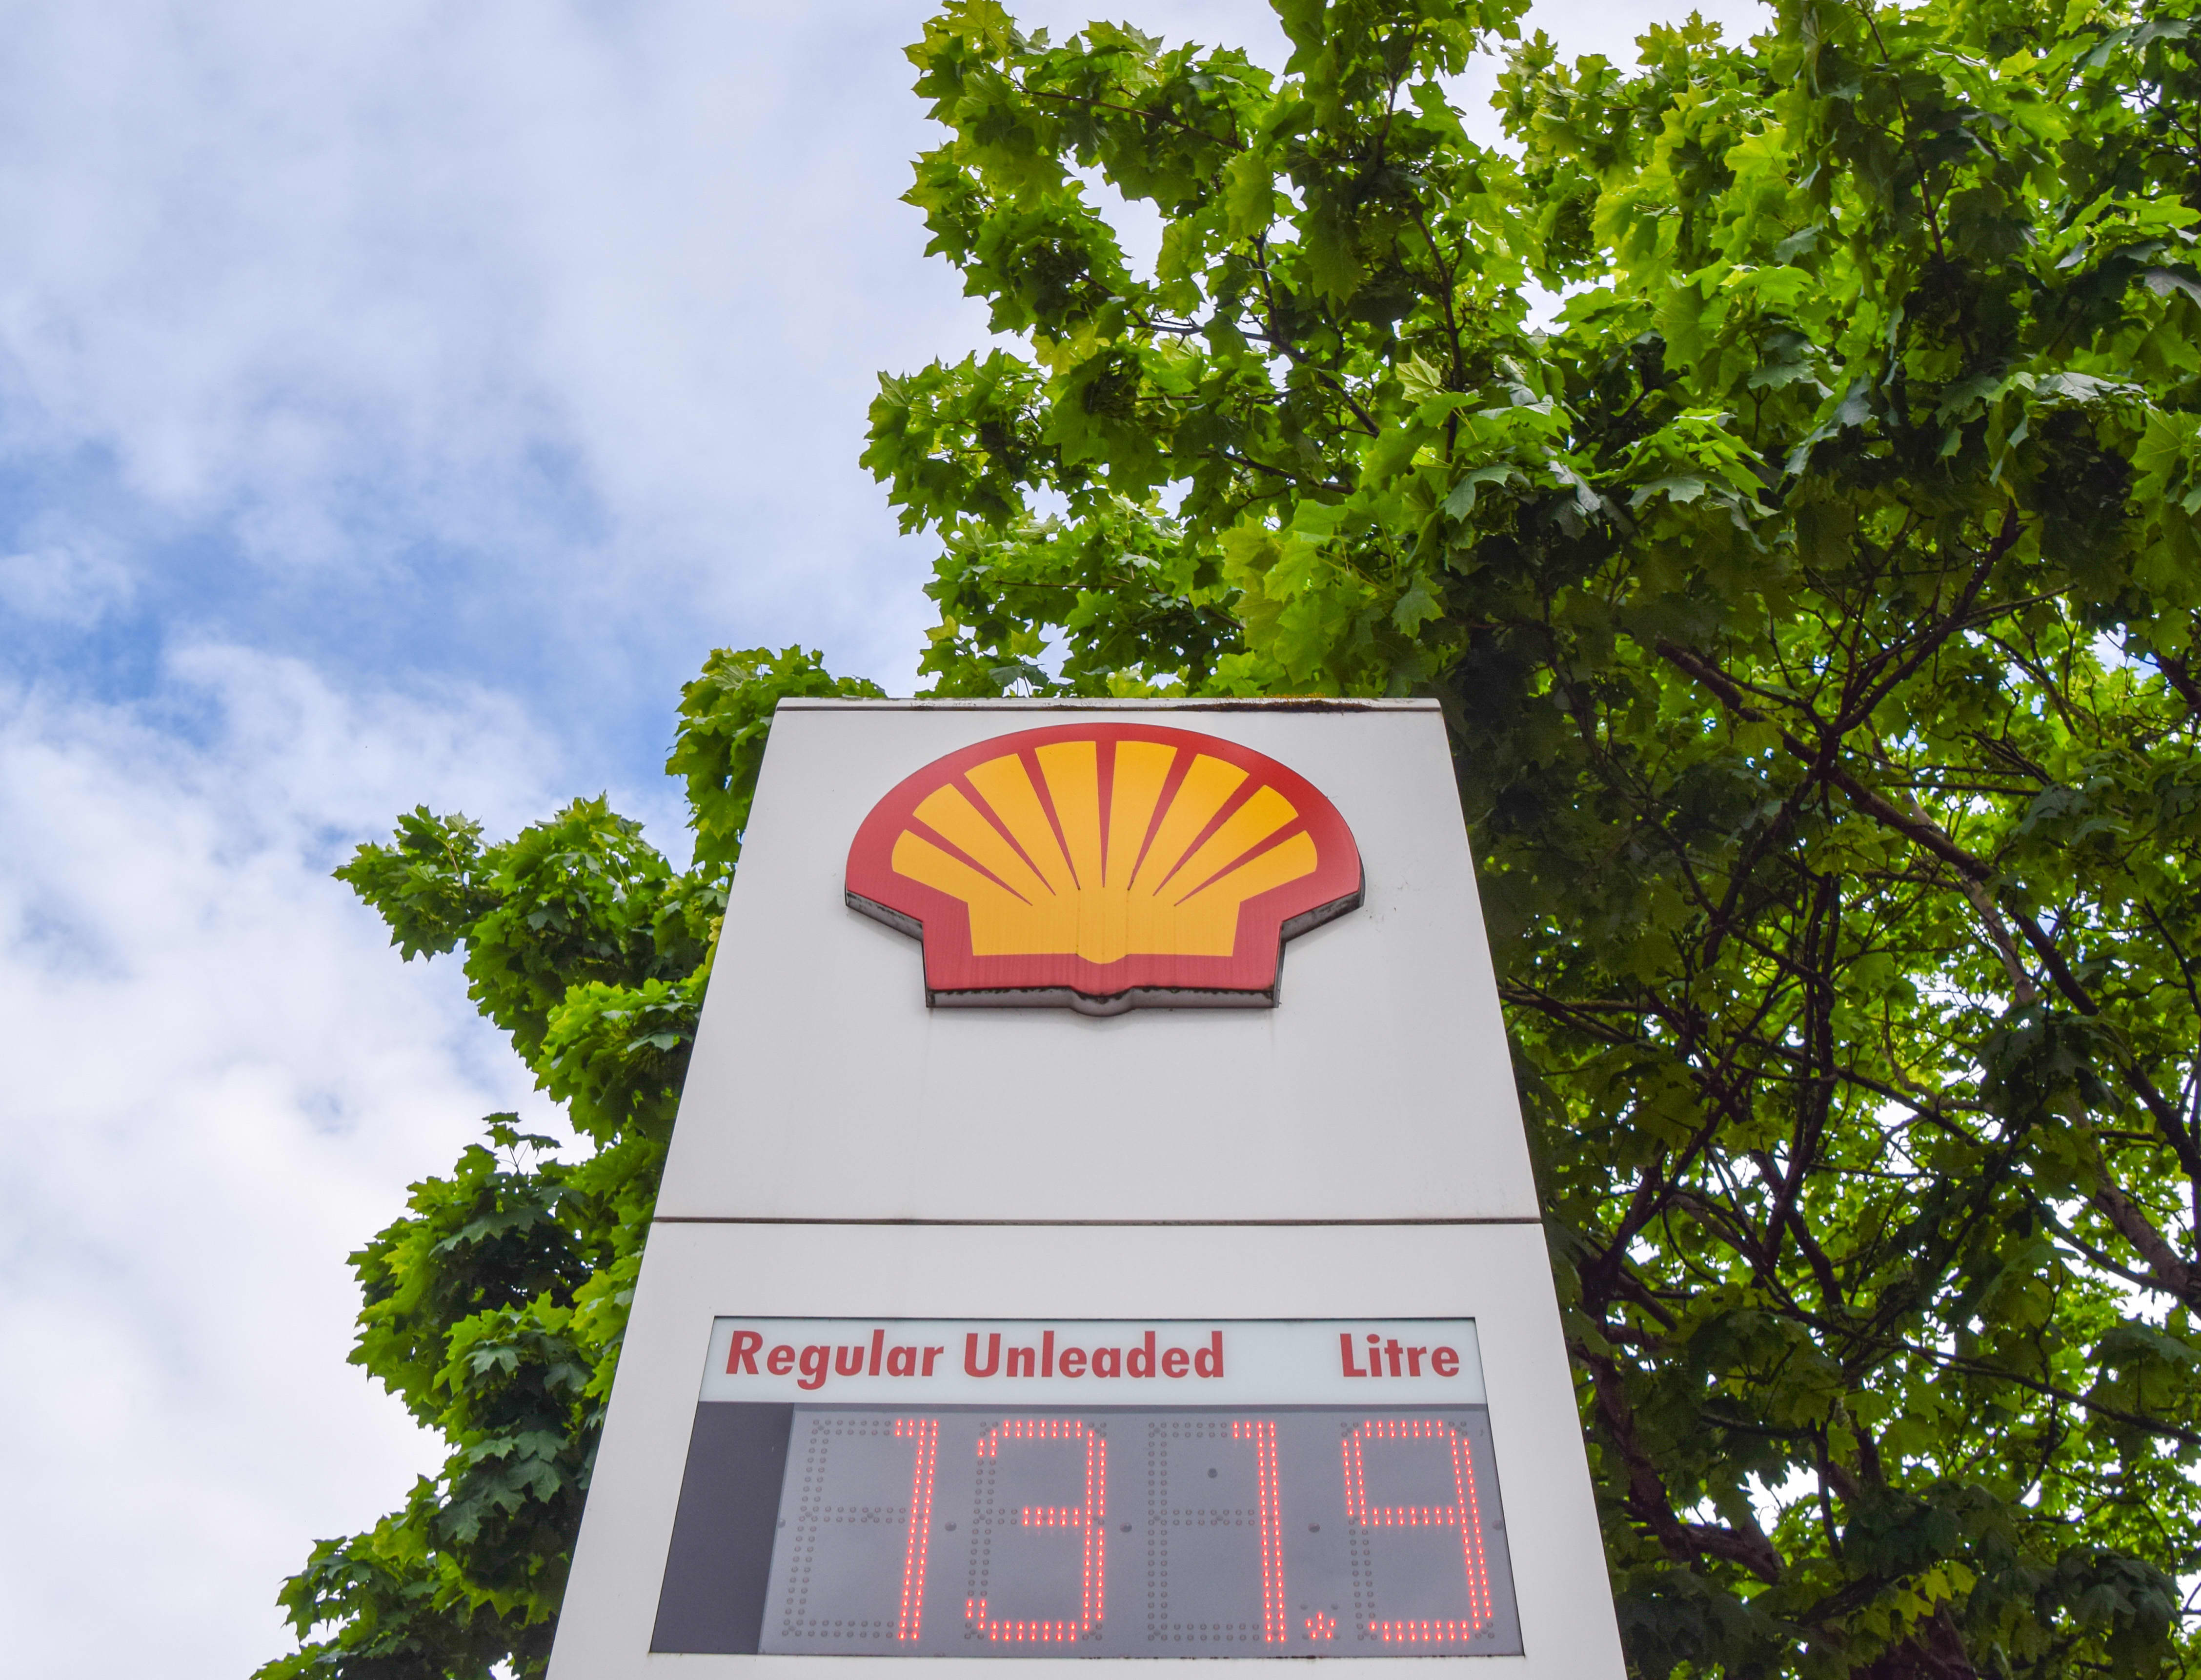 Shell's board of directors sued for 'failing to properly prepare' for the energy transition